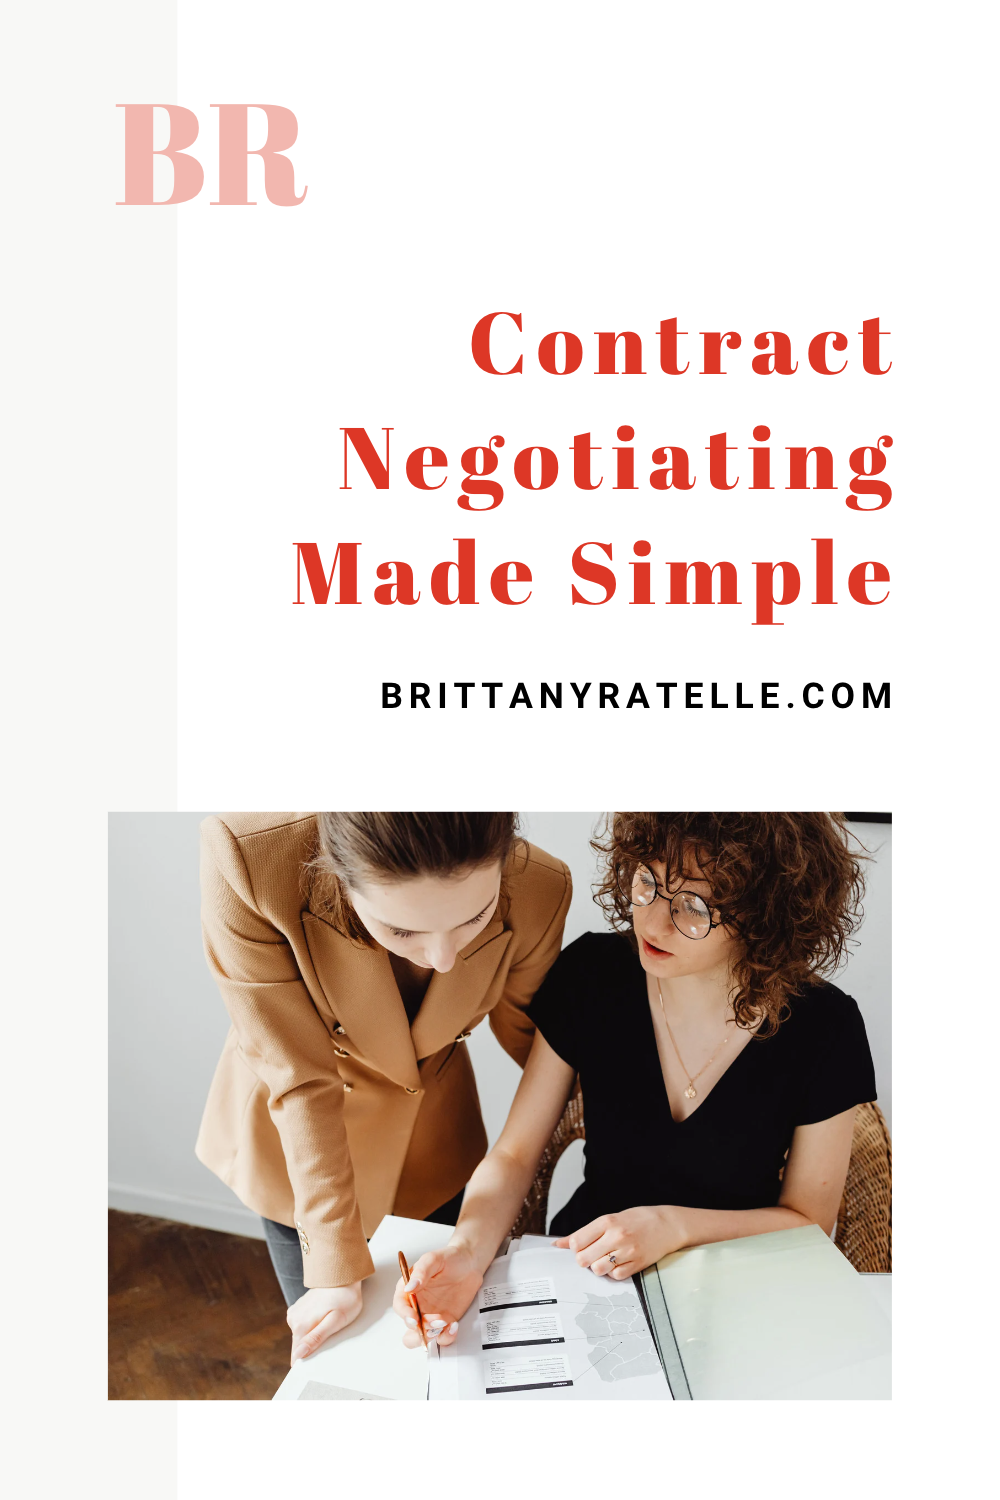 Contract Negotiating Made Simple - Learn How to Negotiate Without an Attorney!